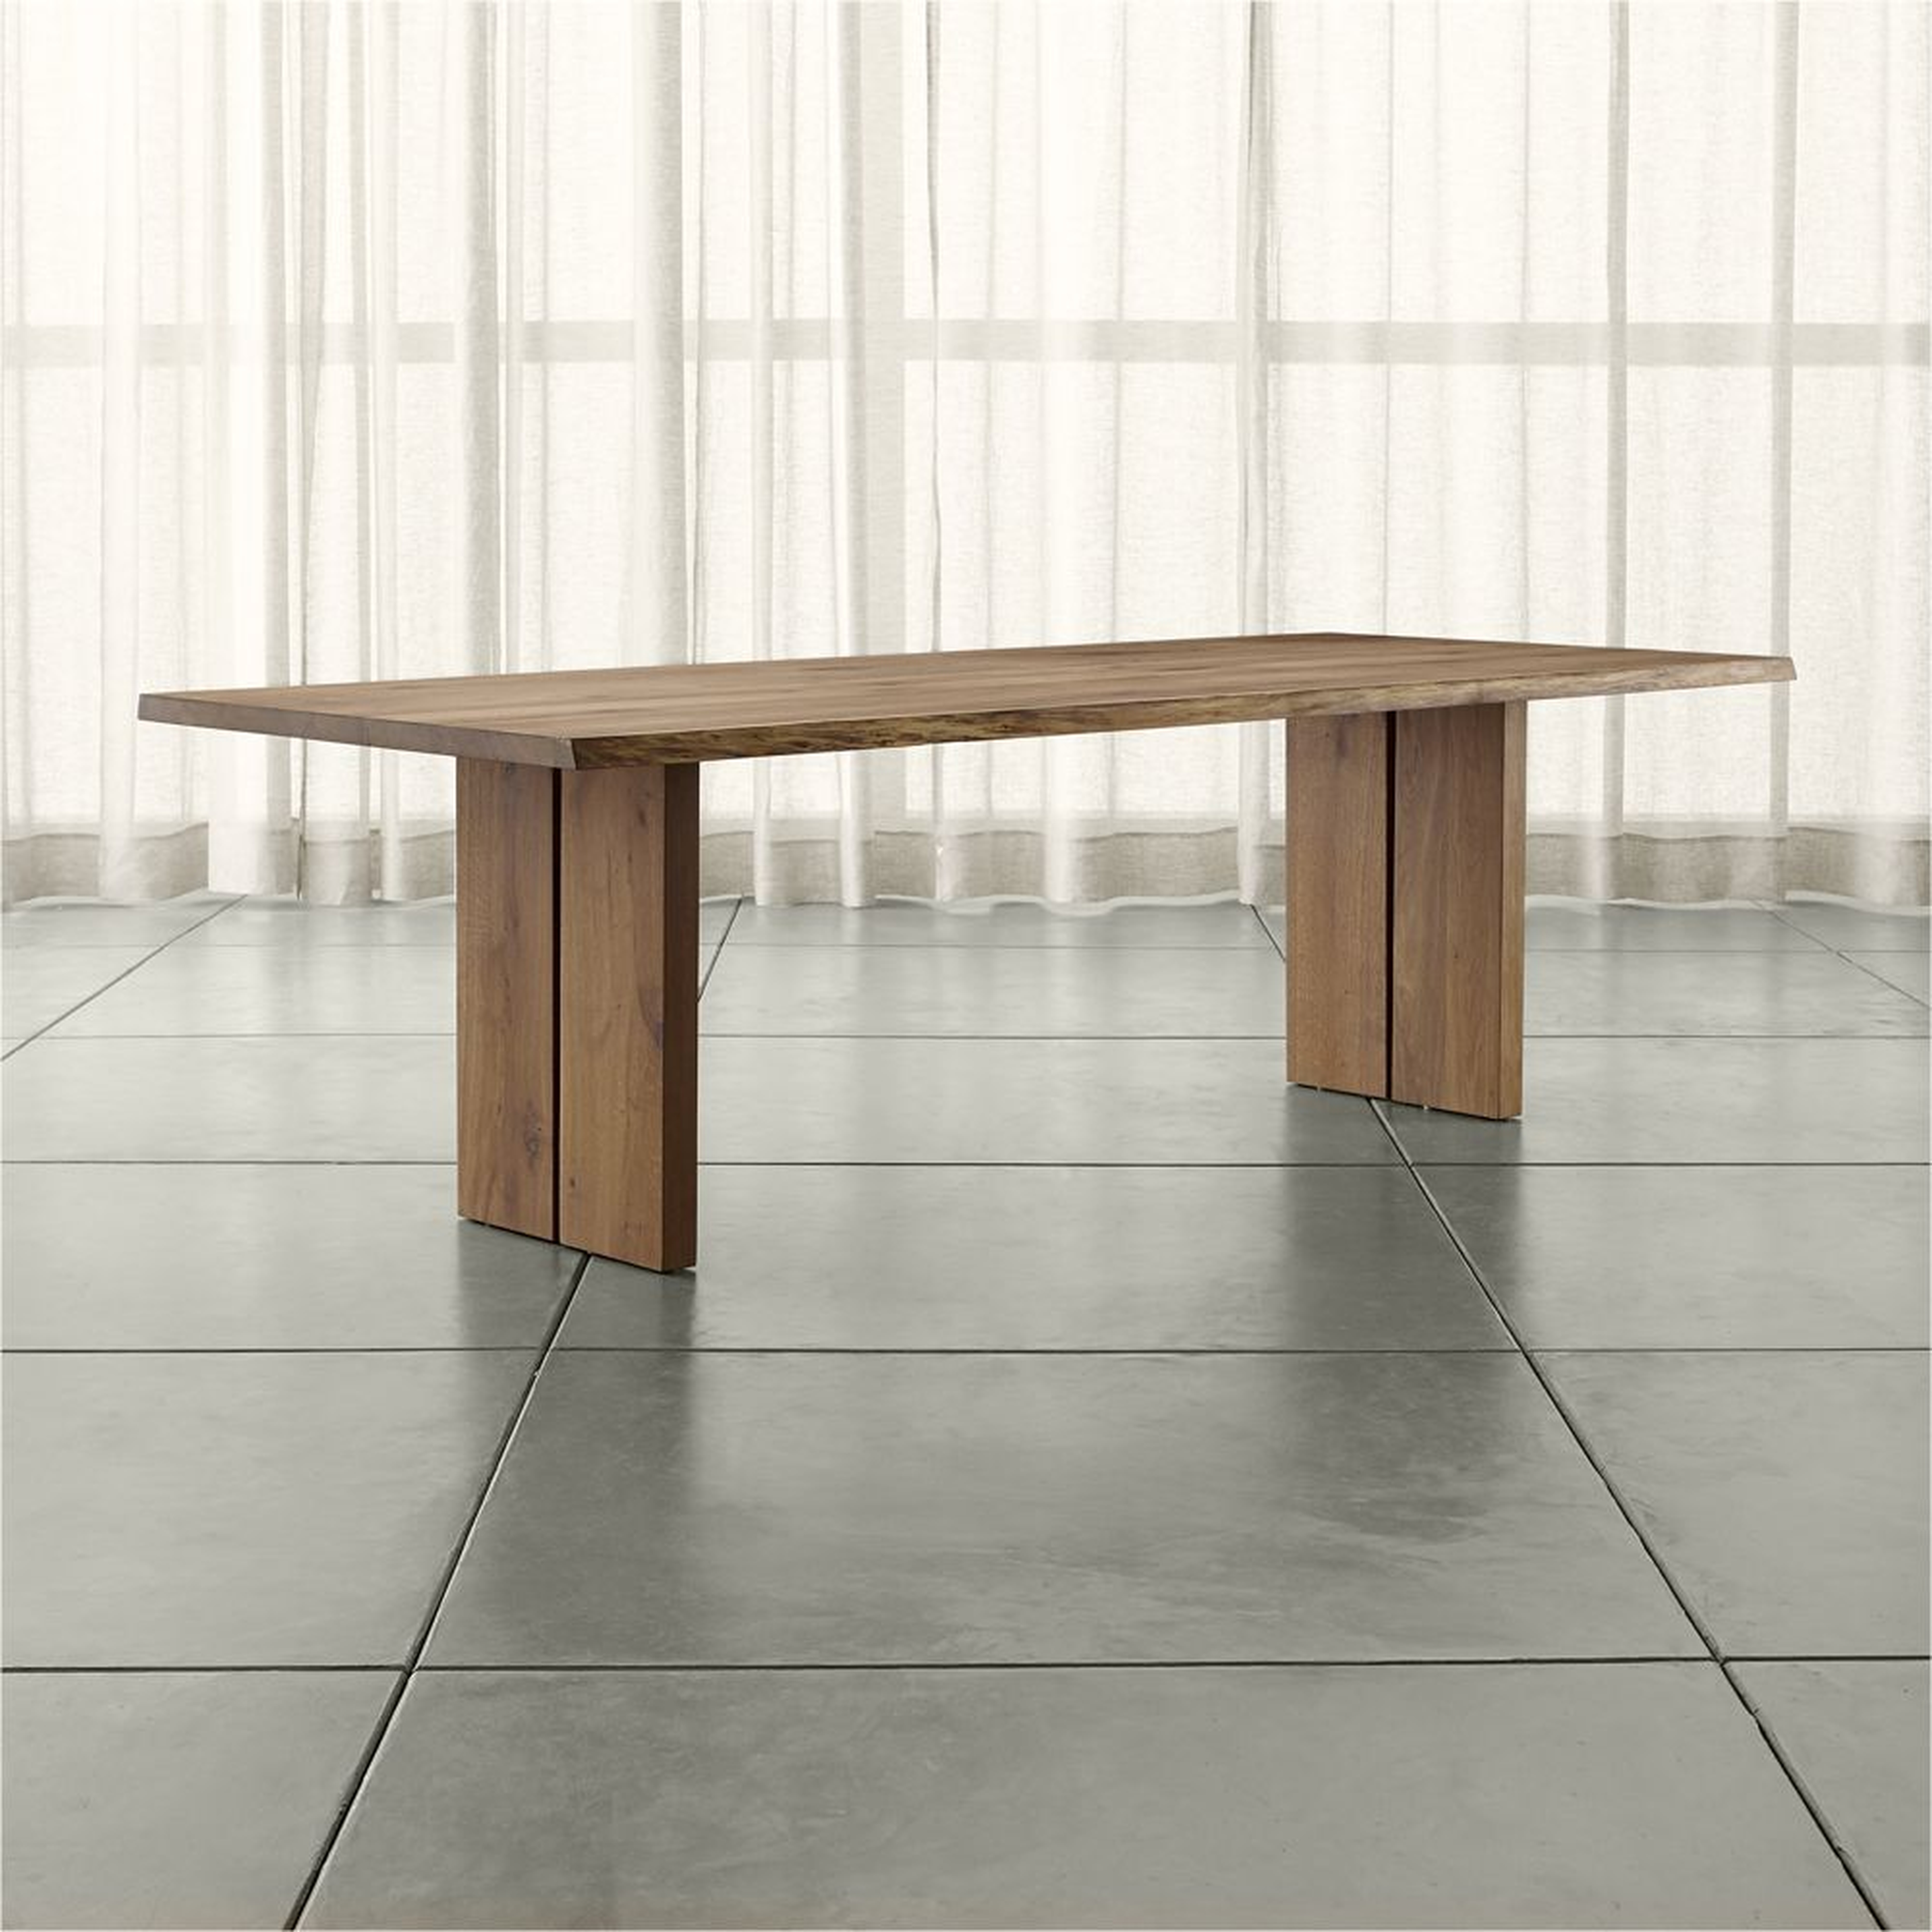 Dakota 99" Dining Table - Crate and Barrel - Crate and Barrel